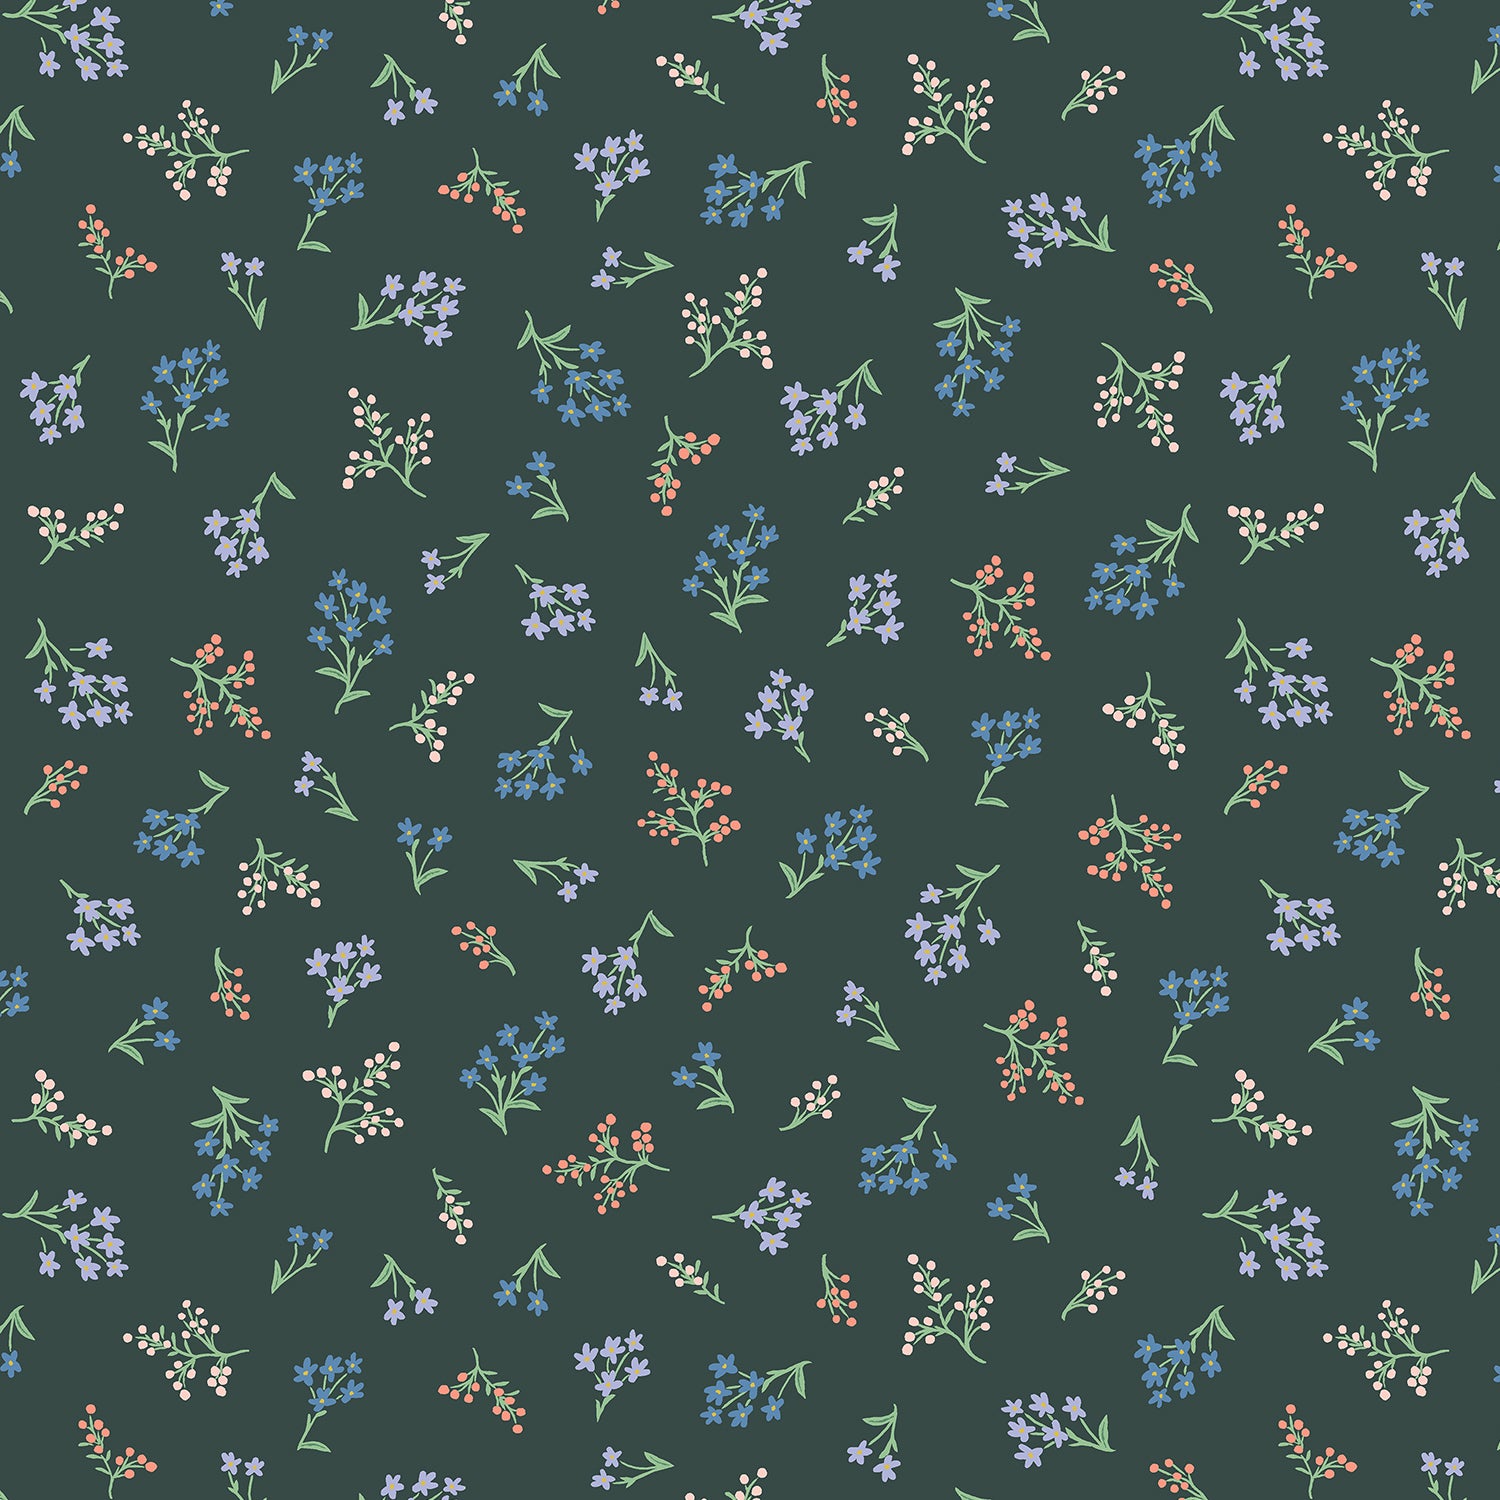 Rifle Paper Co - Petites Fleurs Hunter Cotton from Strawberry Fields